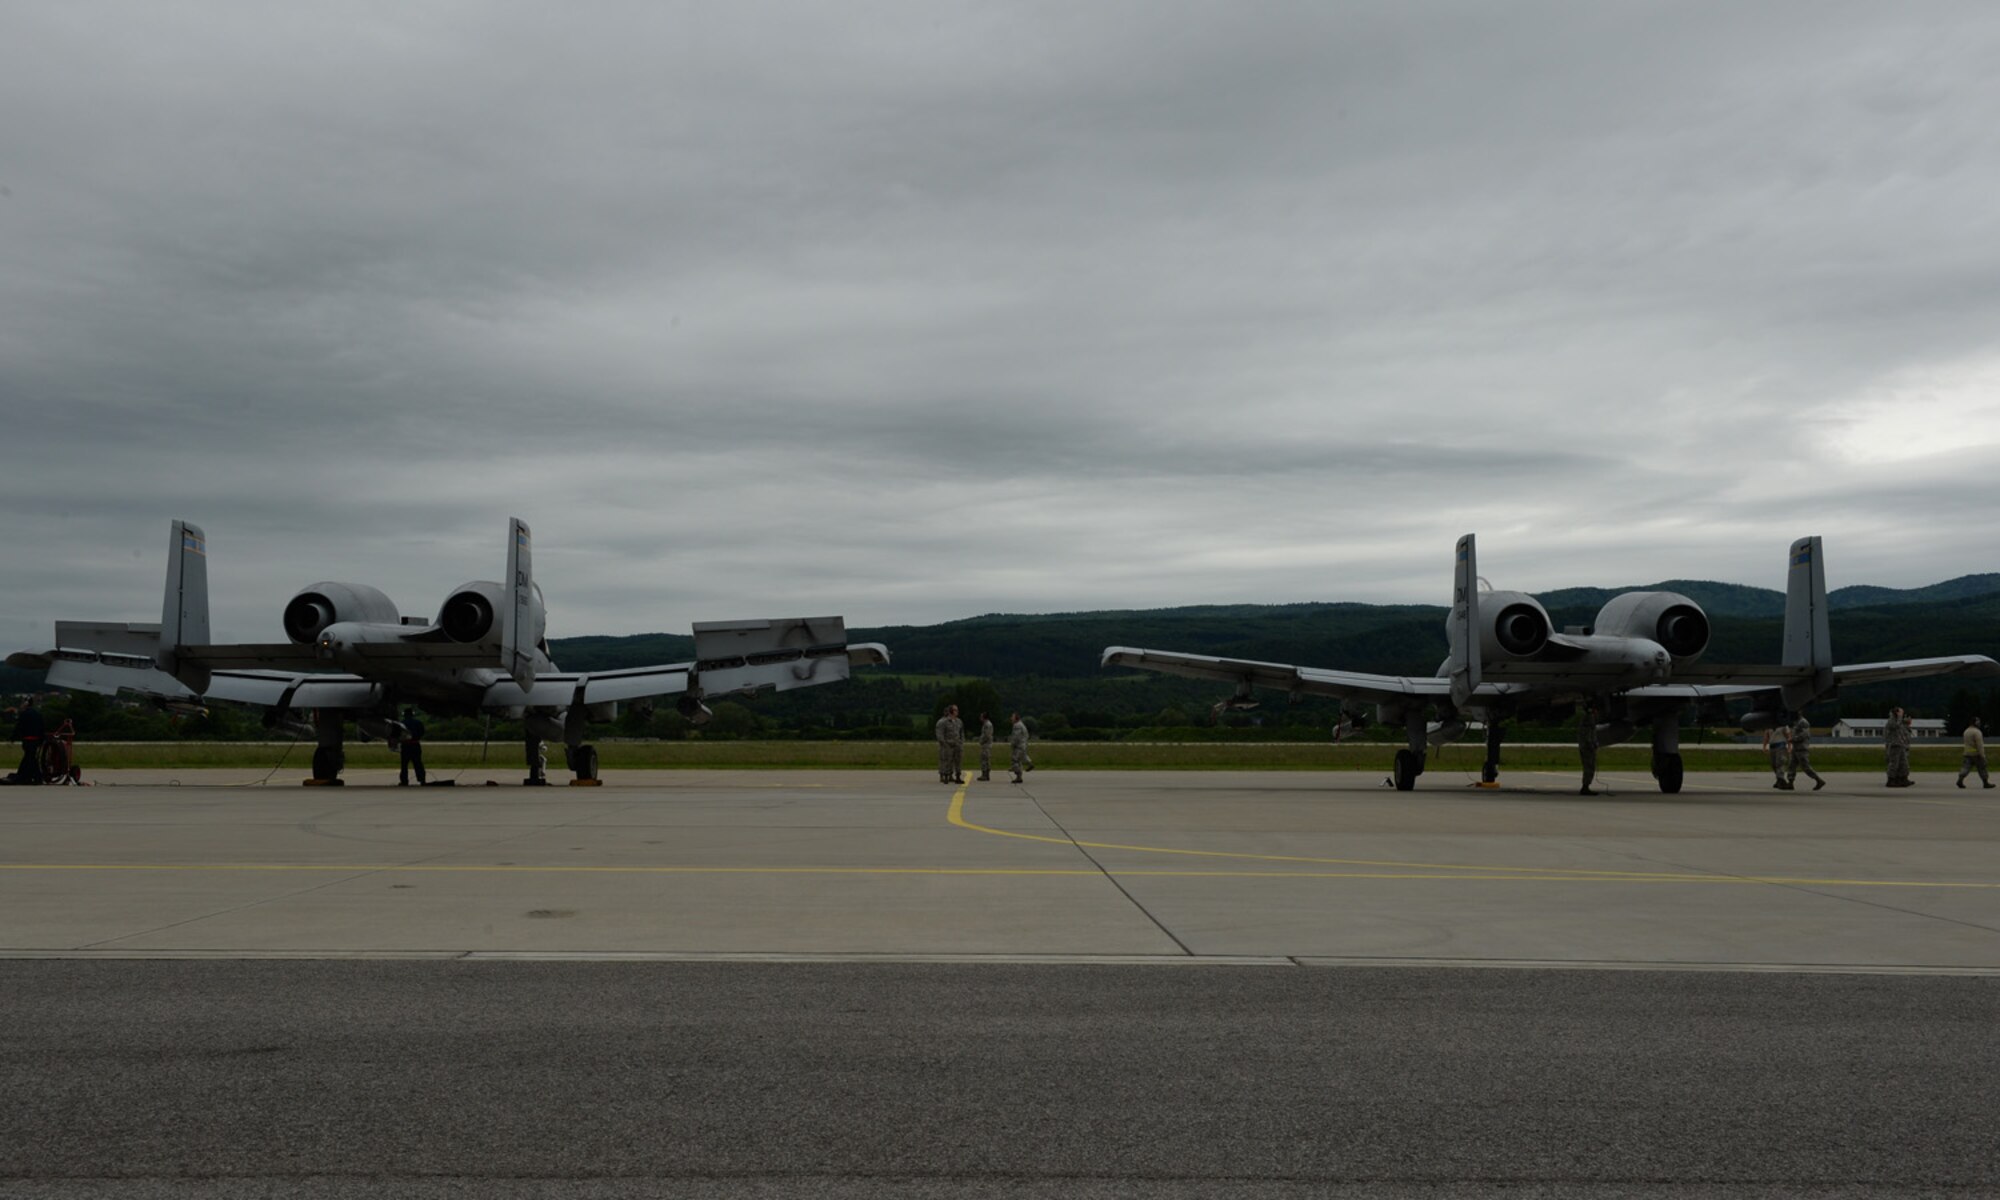 Two U.S. Air Force A-10 Thunderbolt II attack aircraft assigned to the 354th Expeditionary Fighter Squadron sit on the apron during a theater security package deployment at Sliac Air Base, Slovakia, May 22, 2015. The U.S. values the shared commitment and close cooperation with NATO partners on the security and stability of Europe. (U.S. Air Force photo by Senior Airman Dylan Nuckolls/Released)